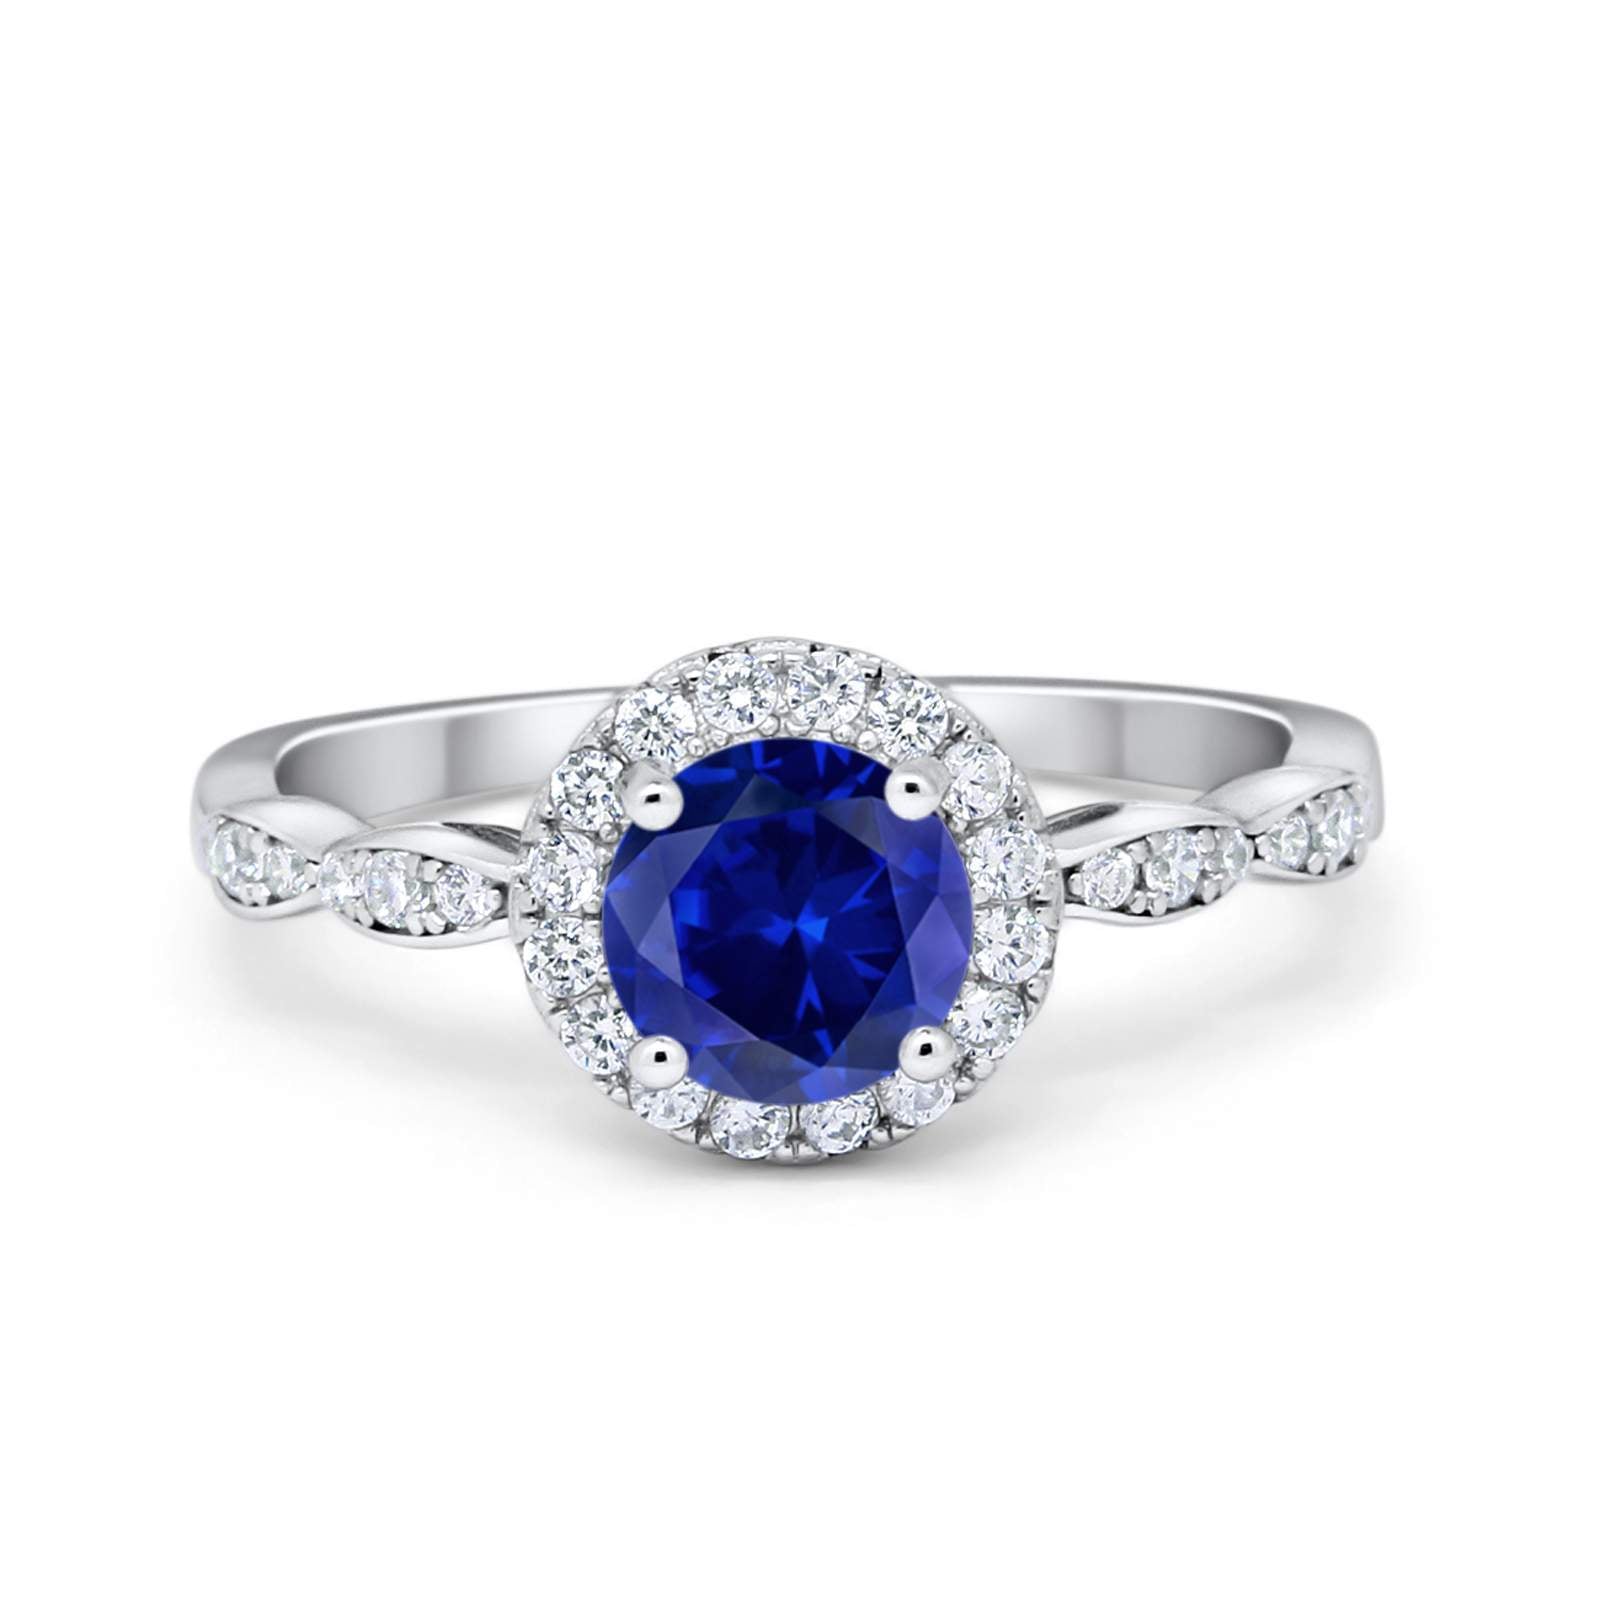 Art Deco Design Engagement Ring Simulated Blue Sapphire CZ 925 Sterling Silver